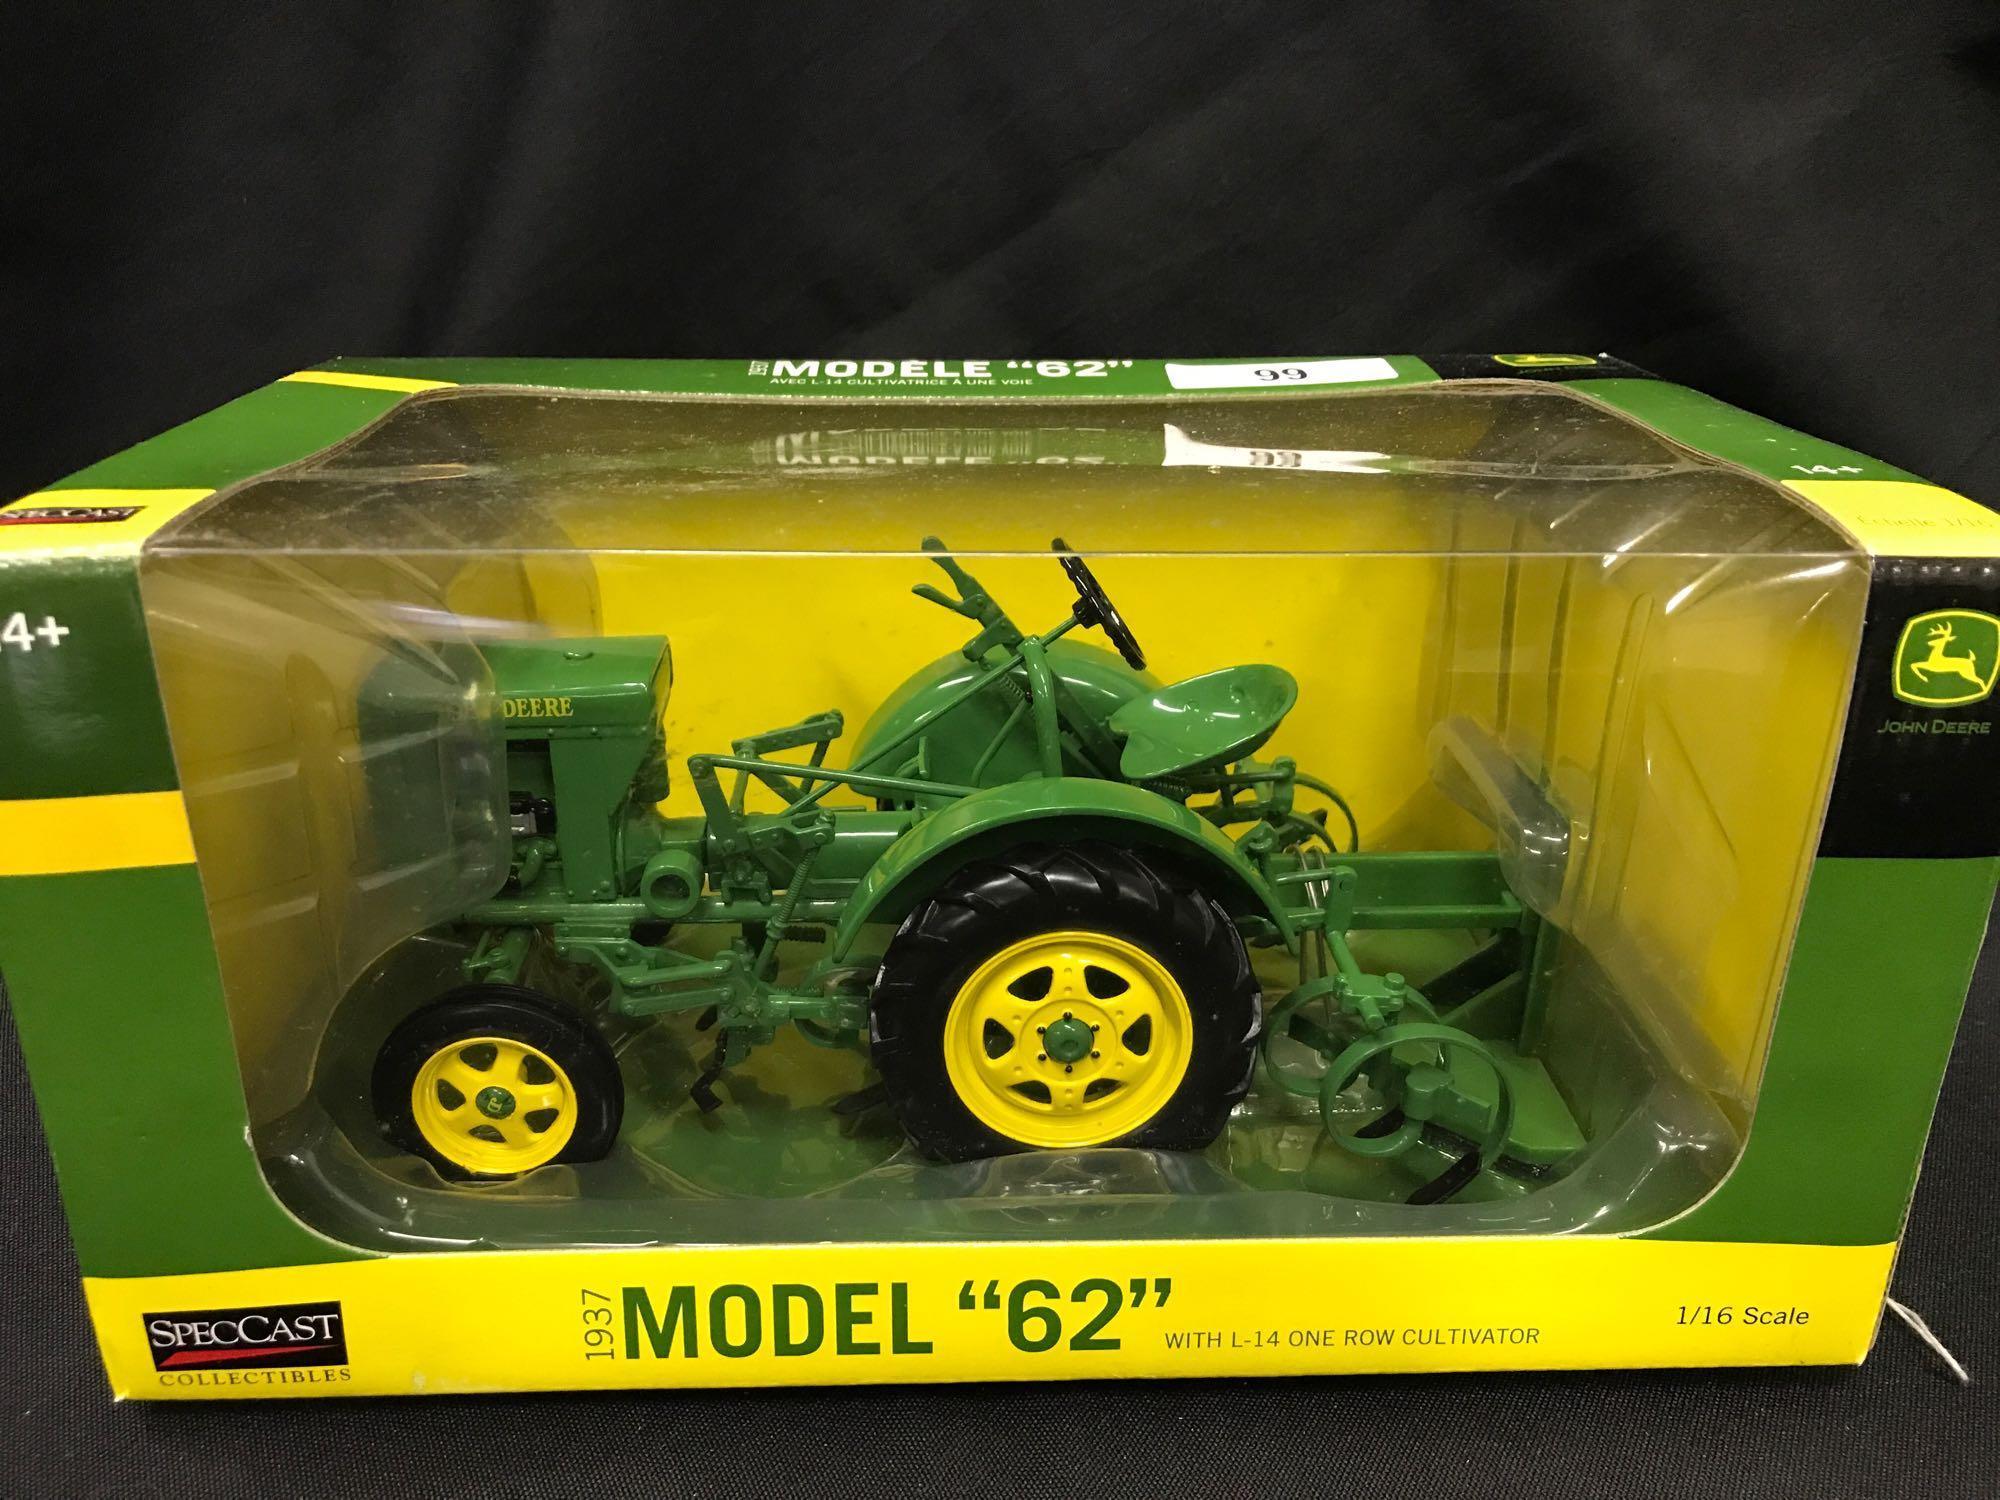 John Deere Model "62" Tractor with "L-14" Cultivator